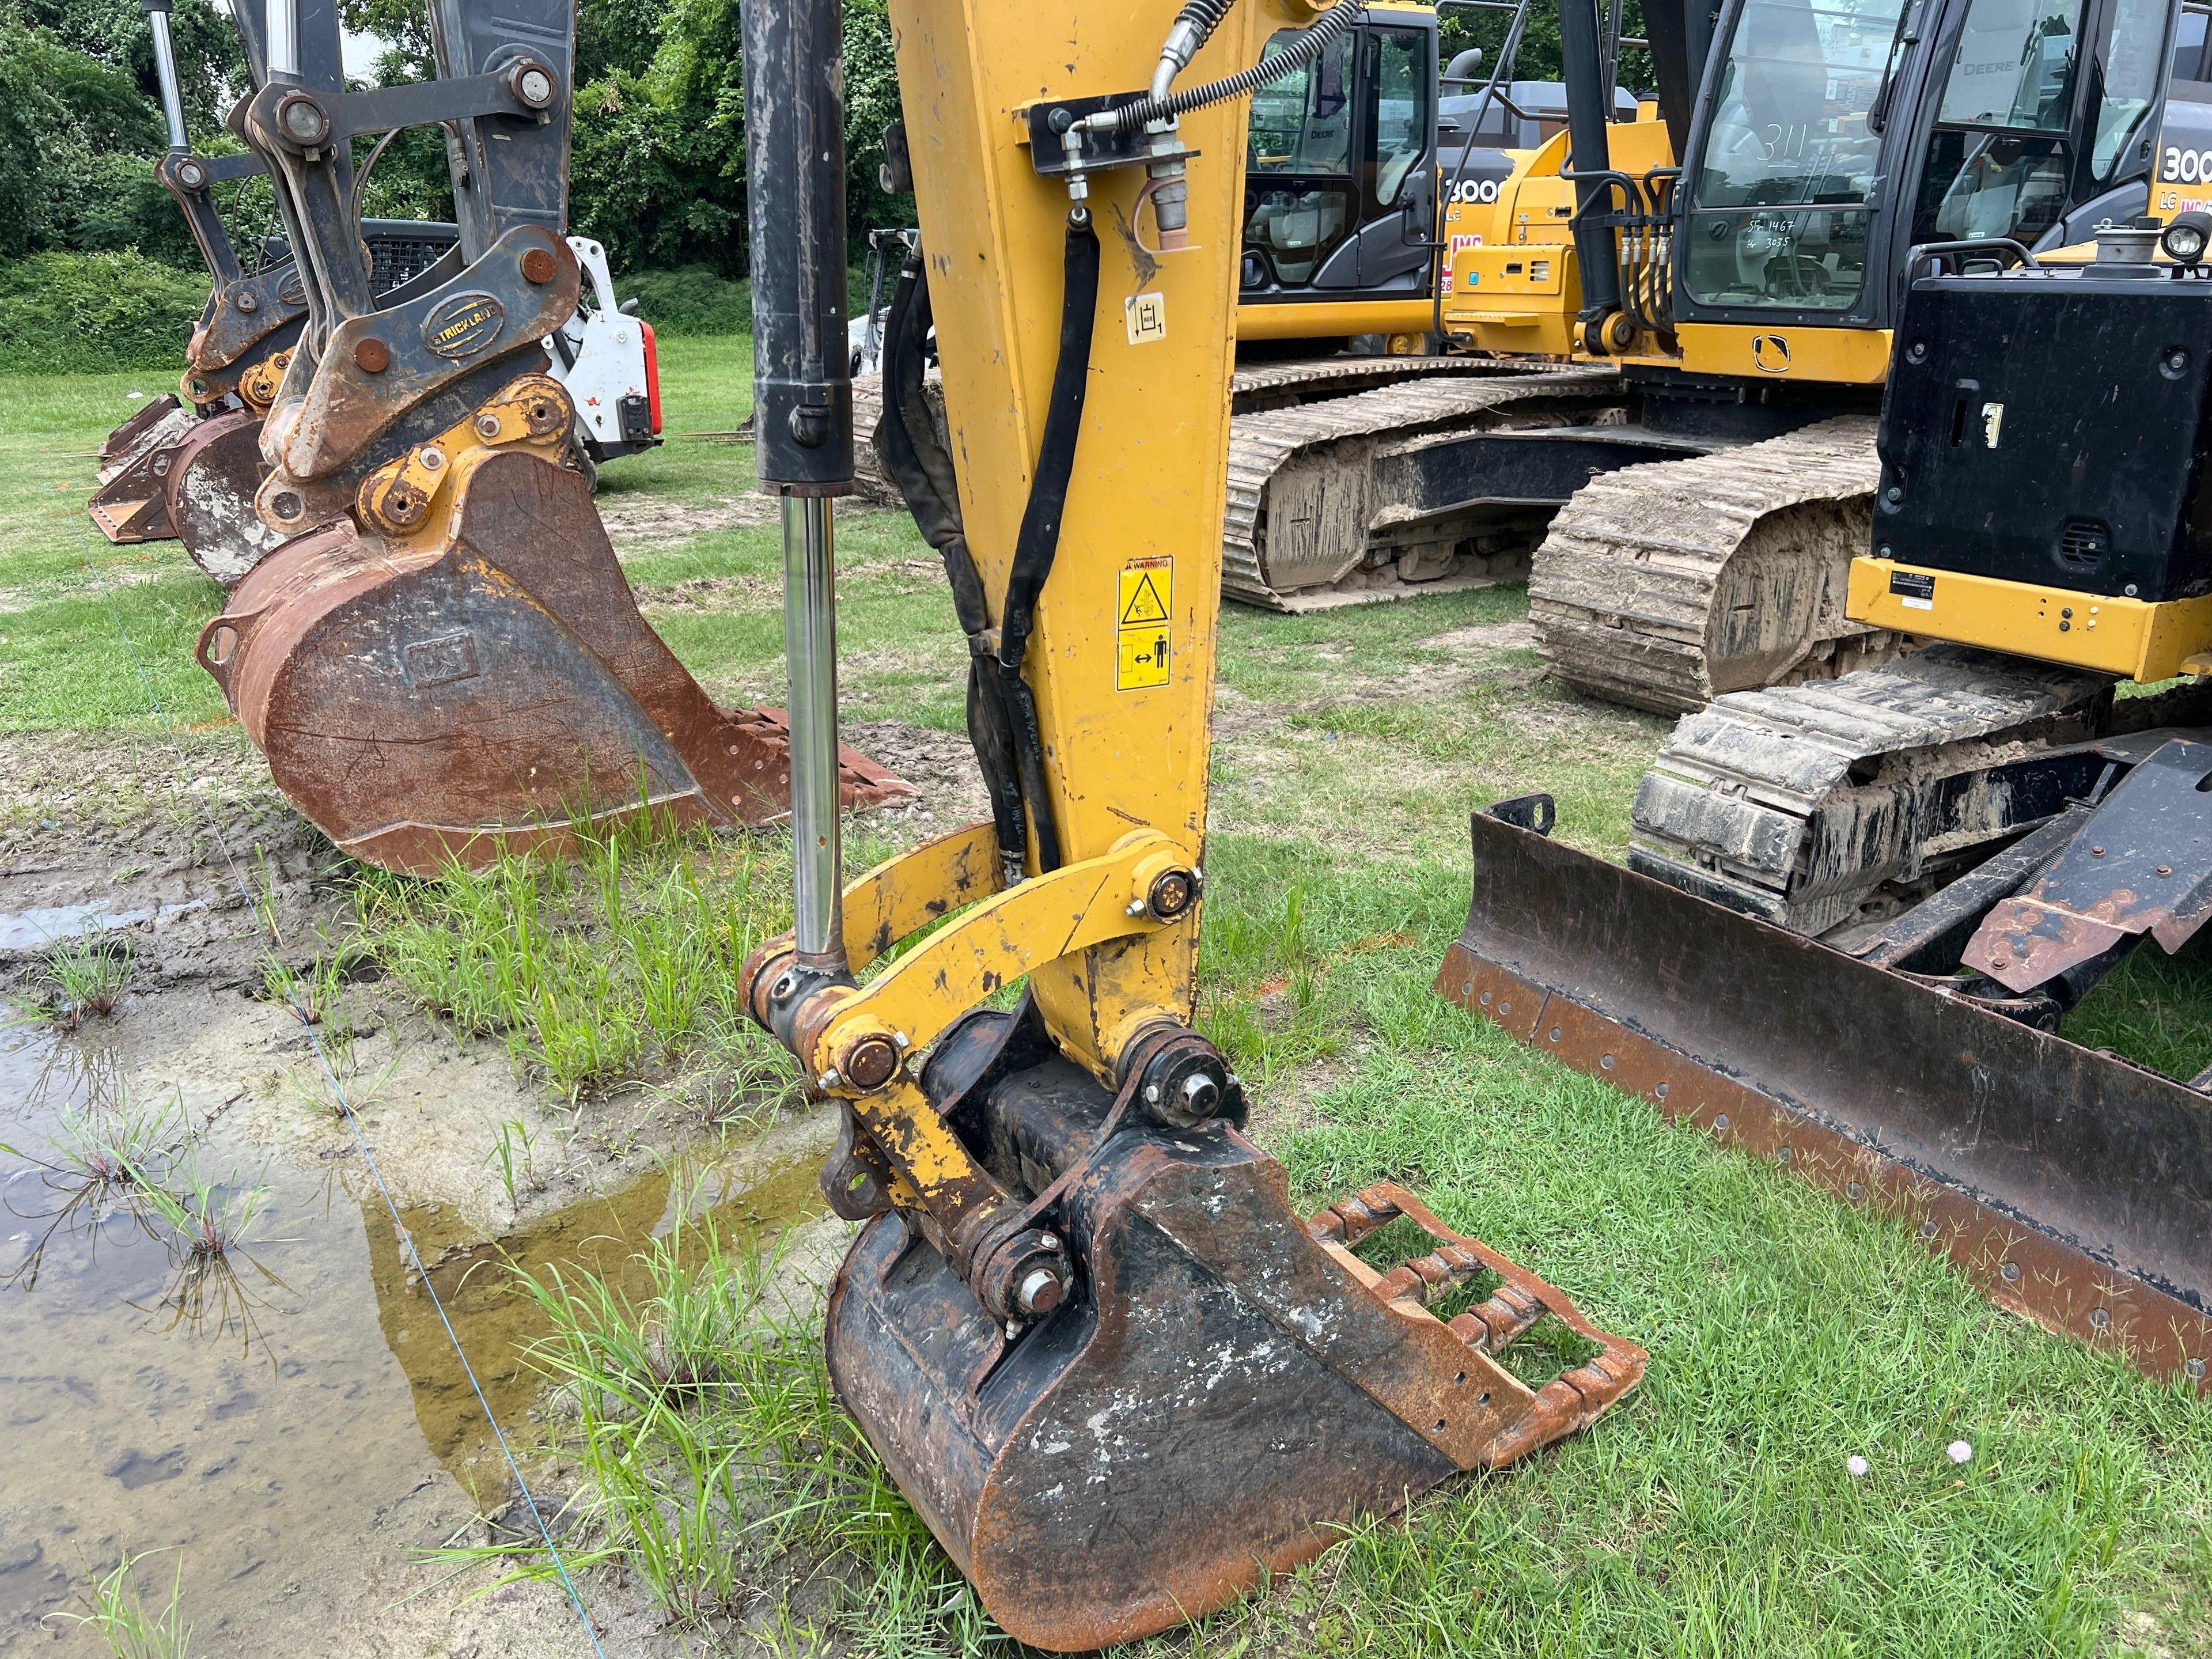 2019 CAT 307.5 HYDRAULIC EXCAVATOR SN:GW701163 powered by Cat diesel engine, equipped with Cab, air,